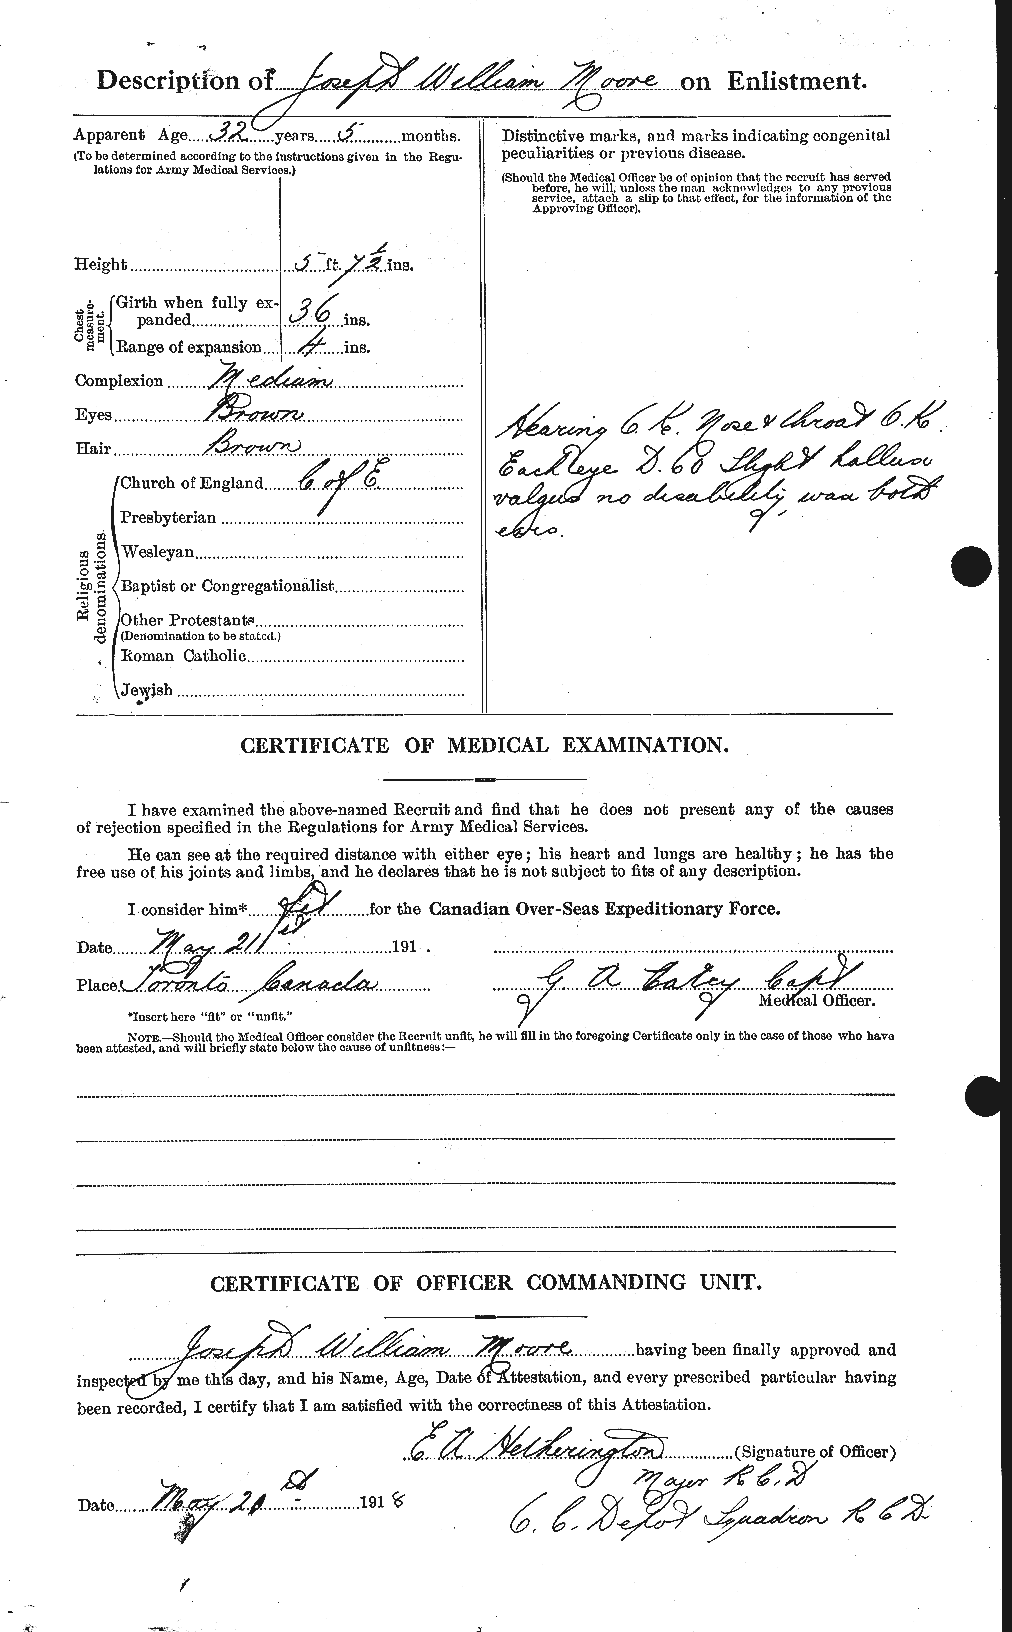 Personnel Records of the First World War - CEF 503382b